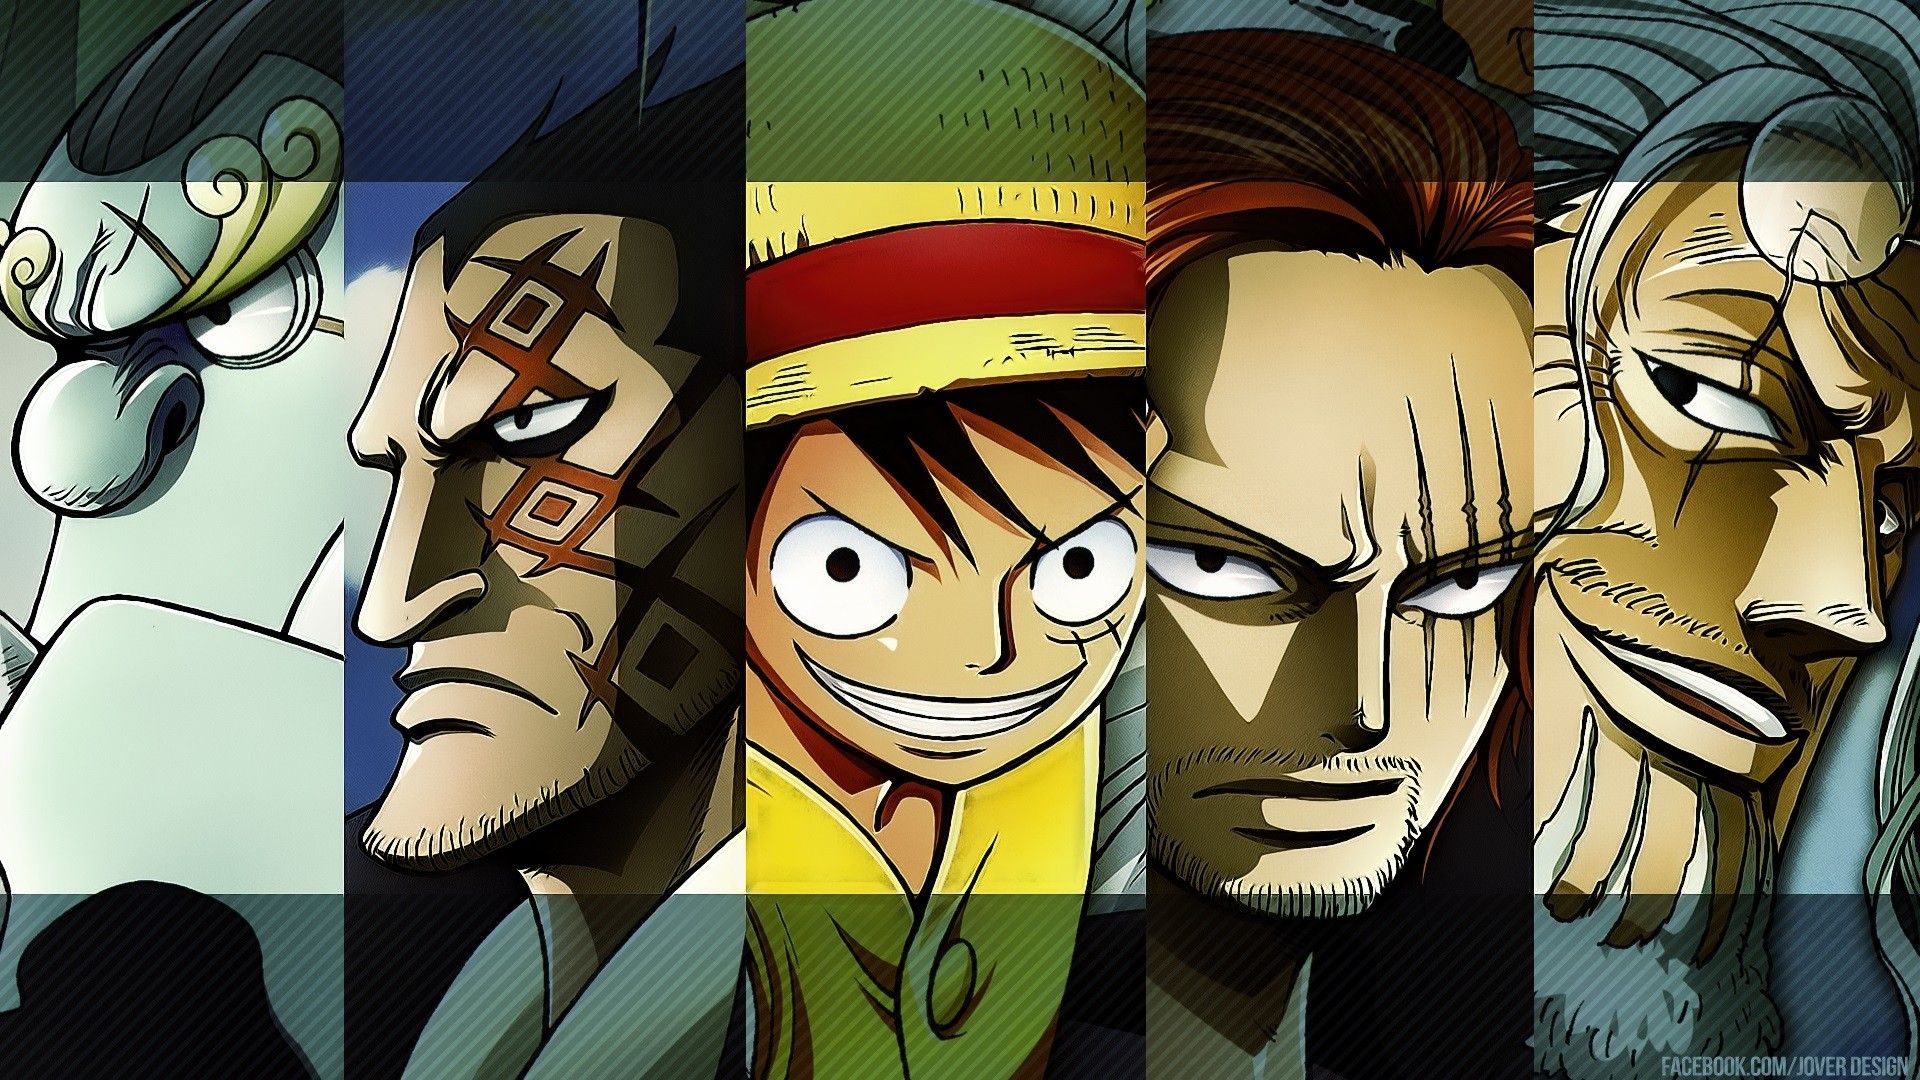 Anime One Piece HD Wallpaper | Background Image